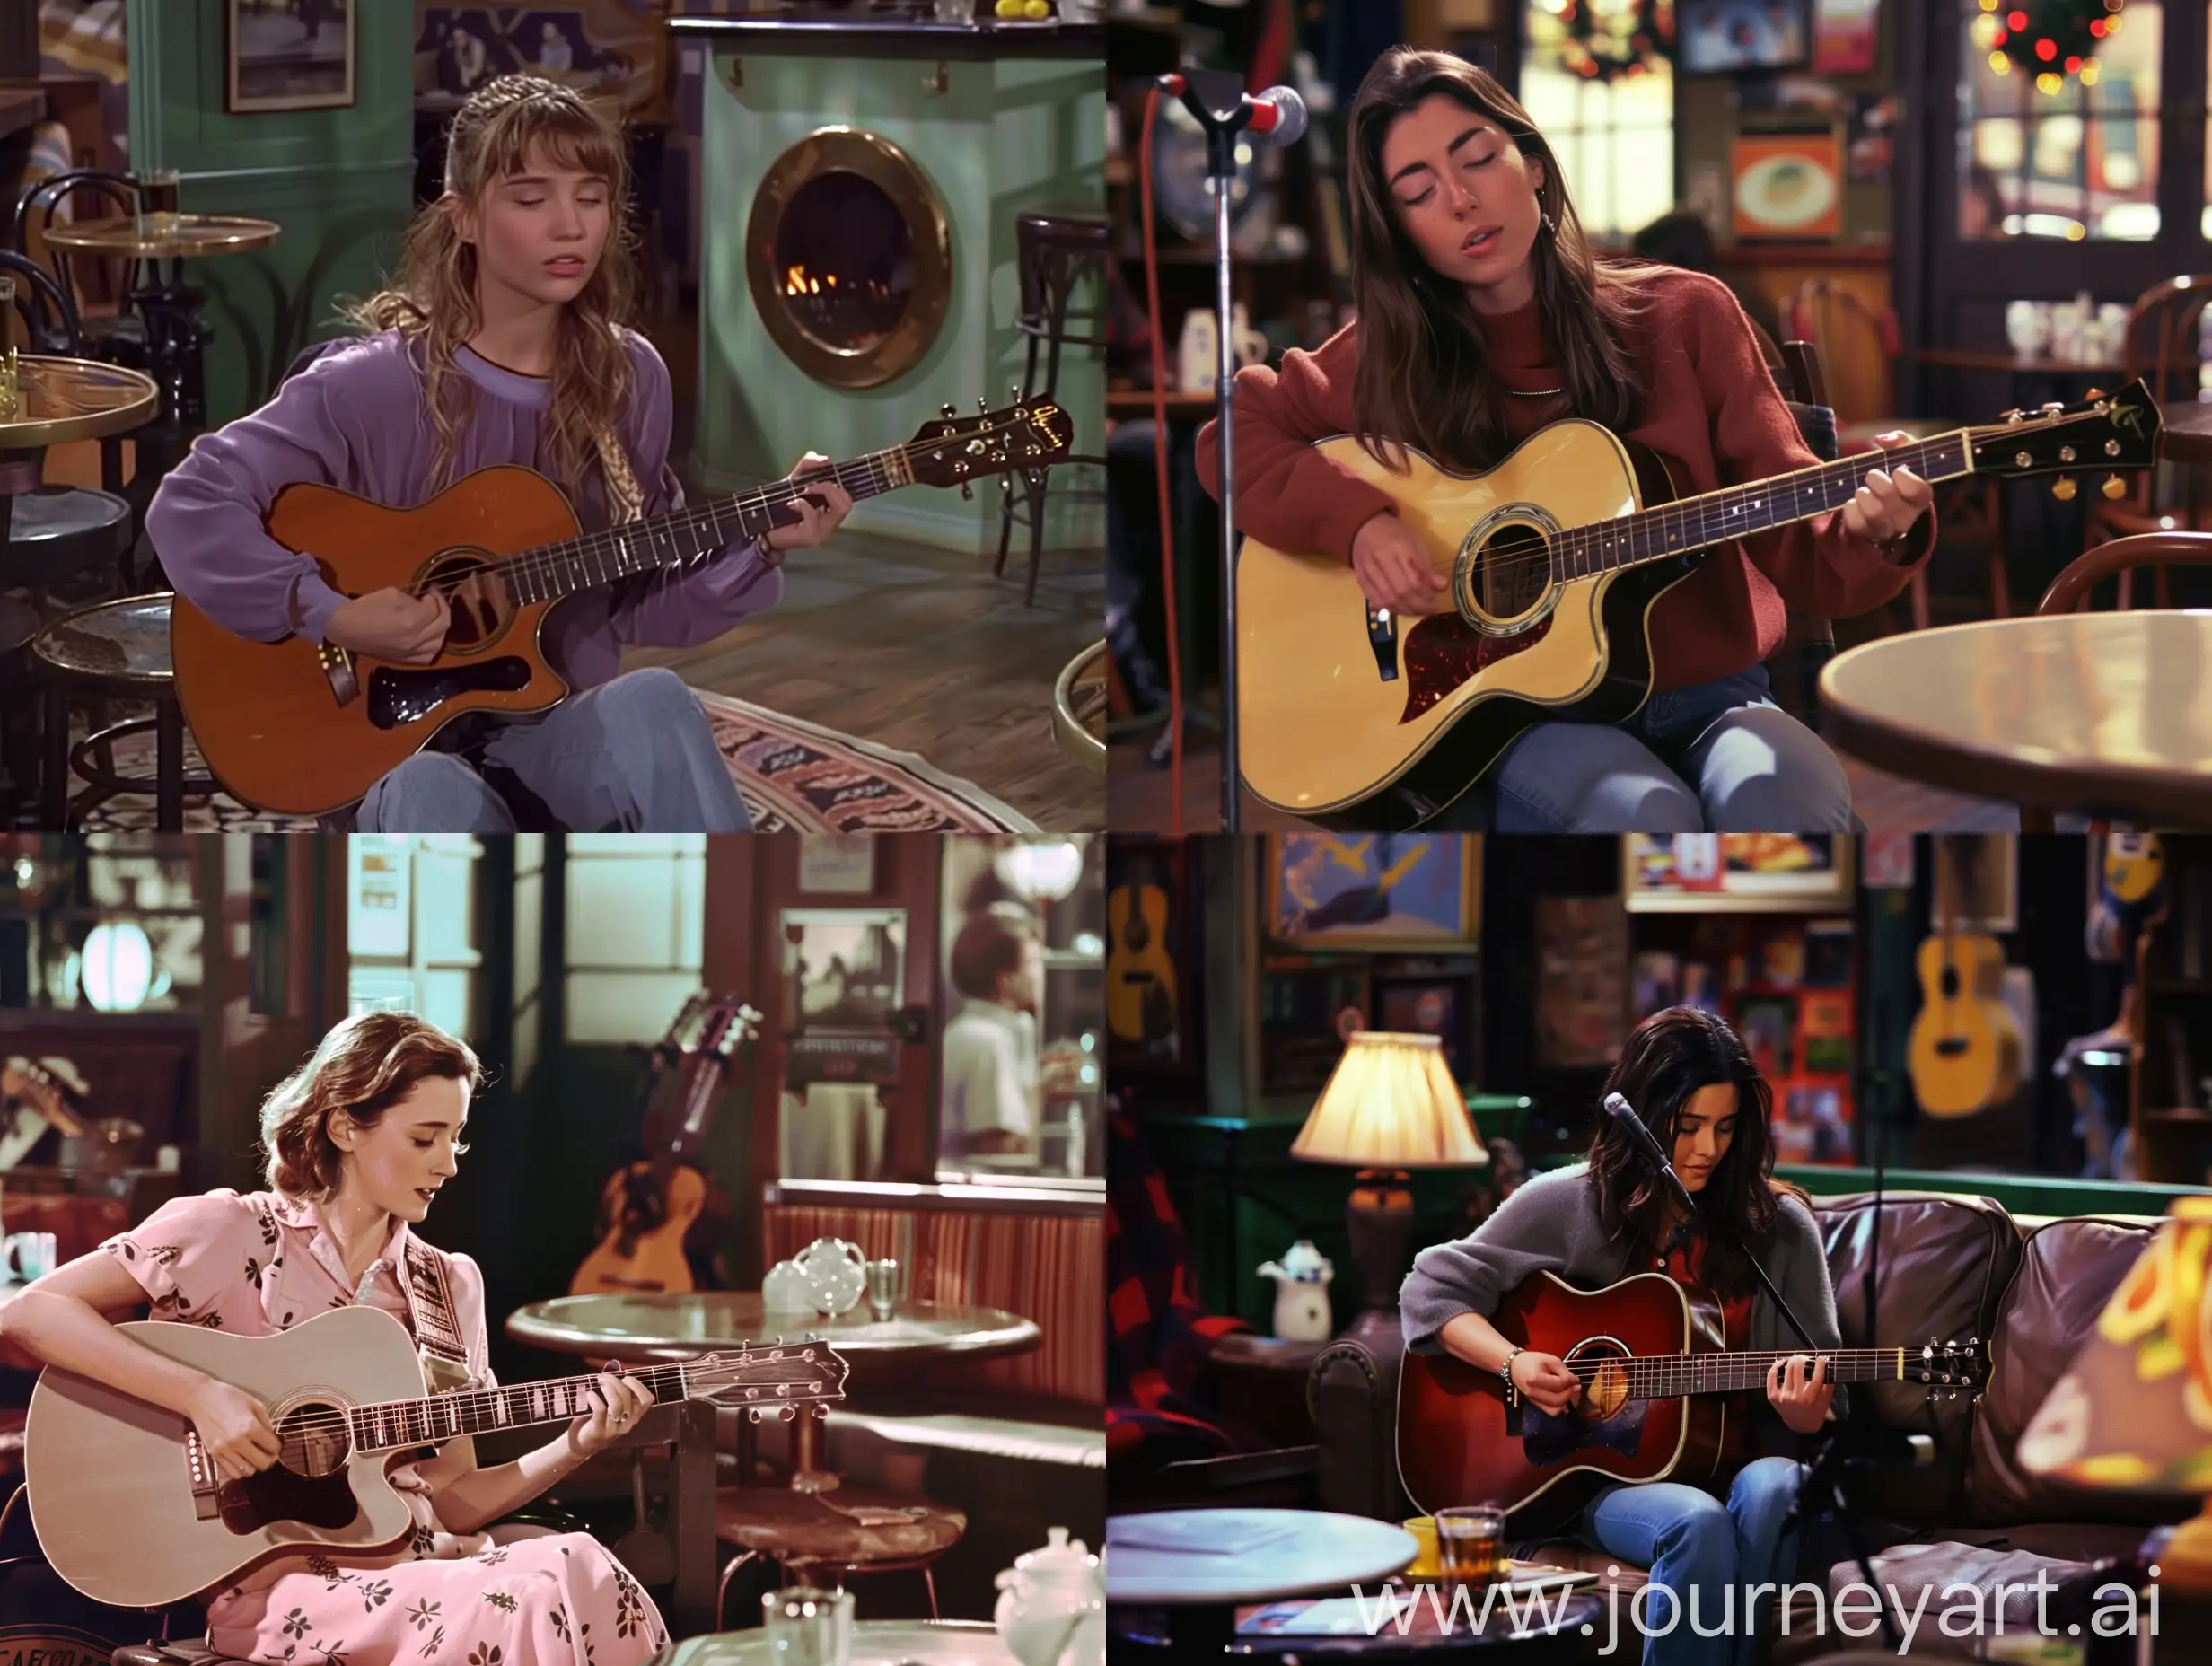 Phoebe-Buffay-Performing-Live-Music-at-Central-Perk-Cafe-1950s-Style